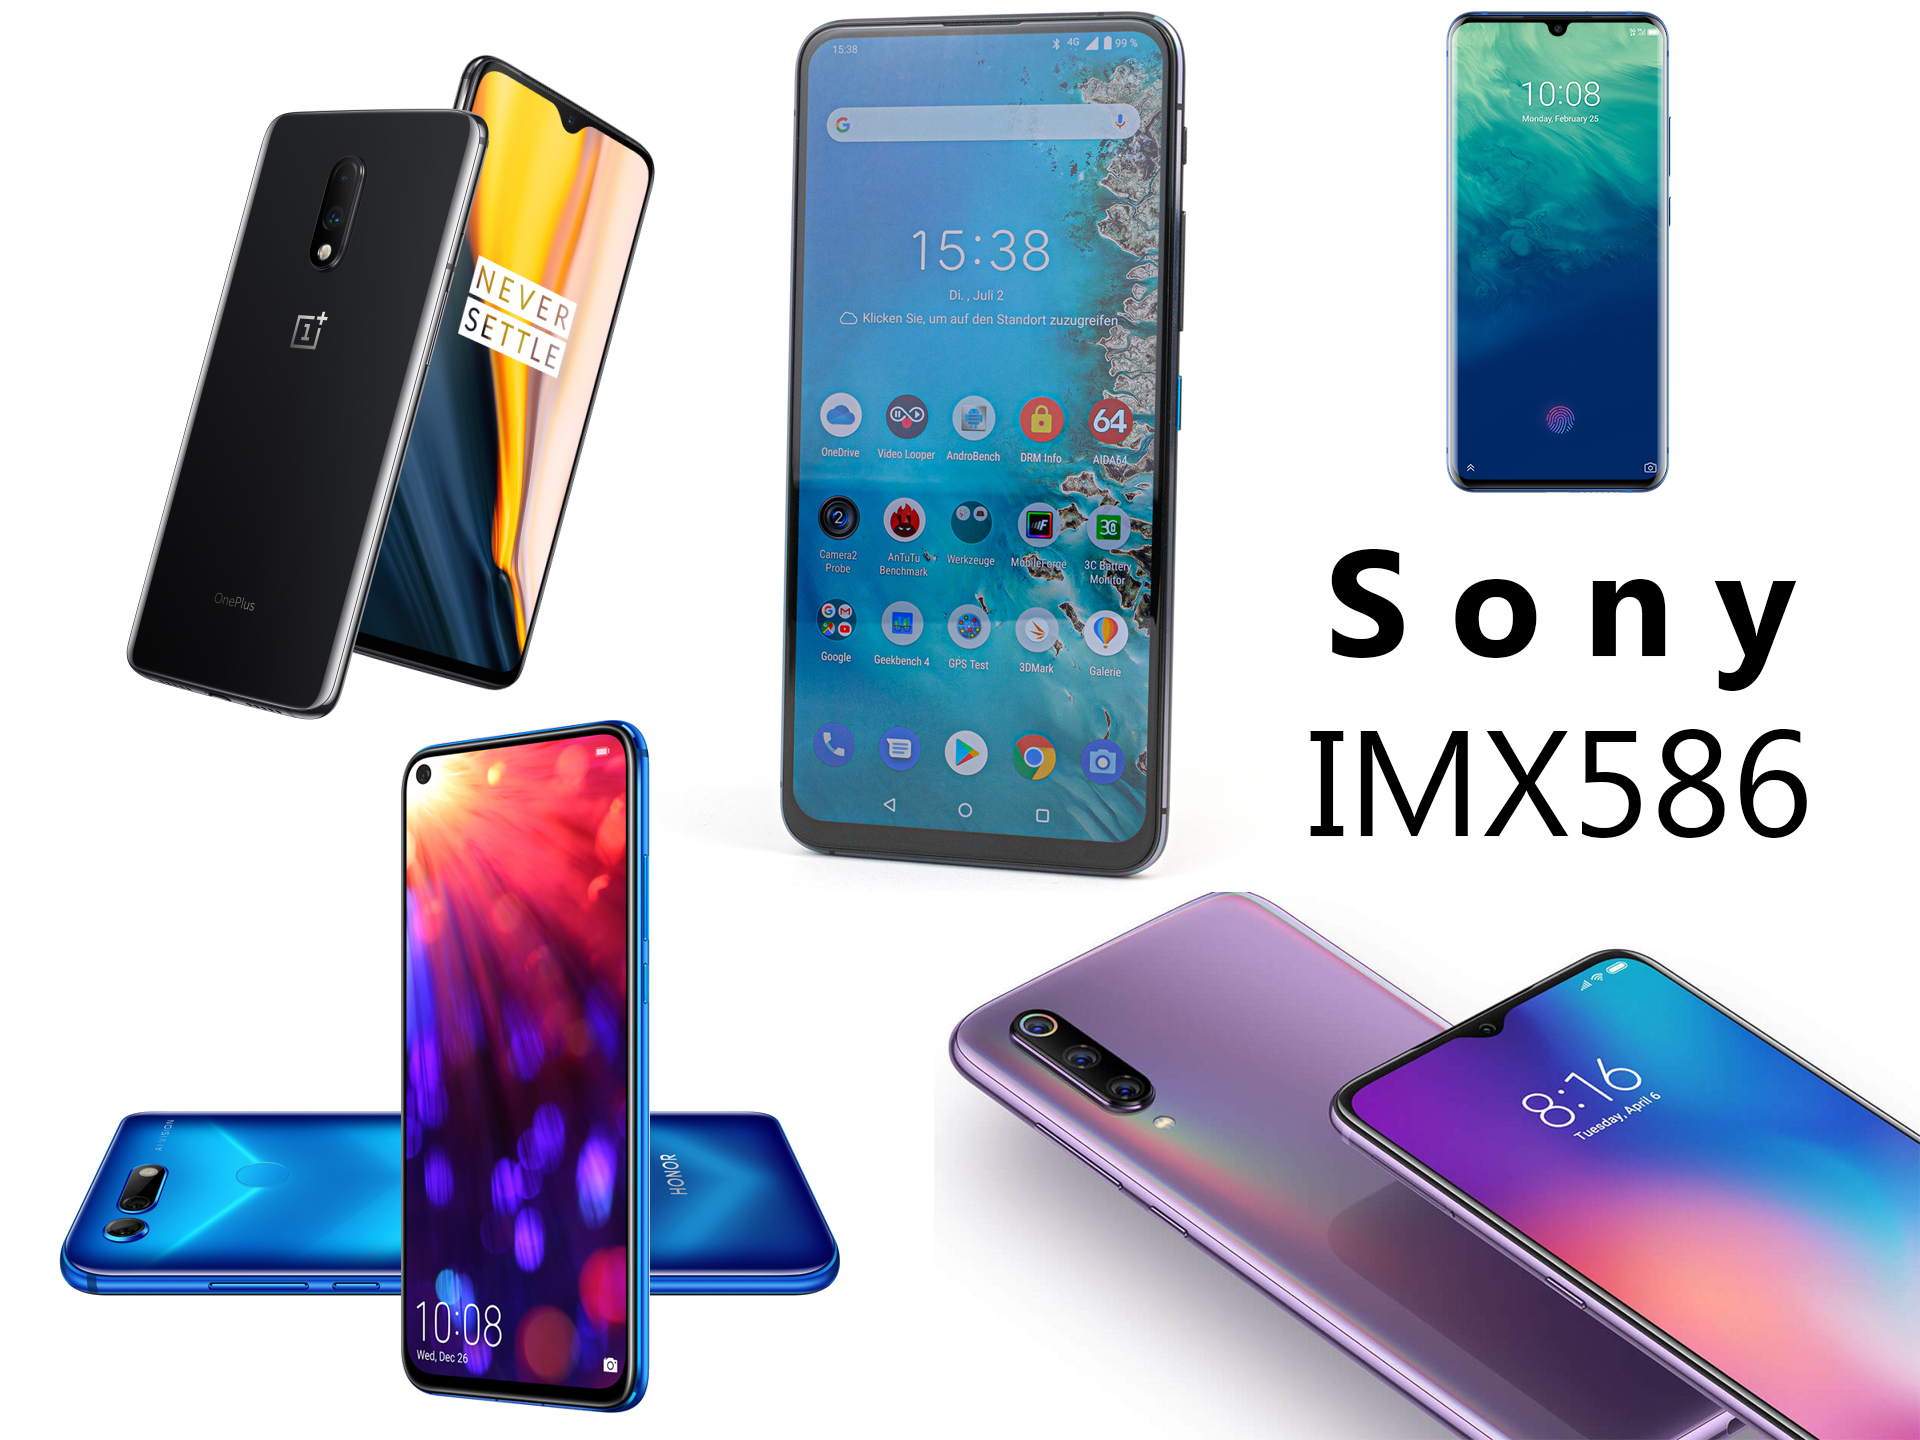 Sony IMX586 Comparison Review: Five 48 MP smartphones face-off duel - NotebookCheck.net Reviews